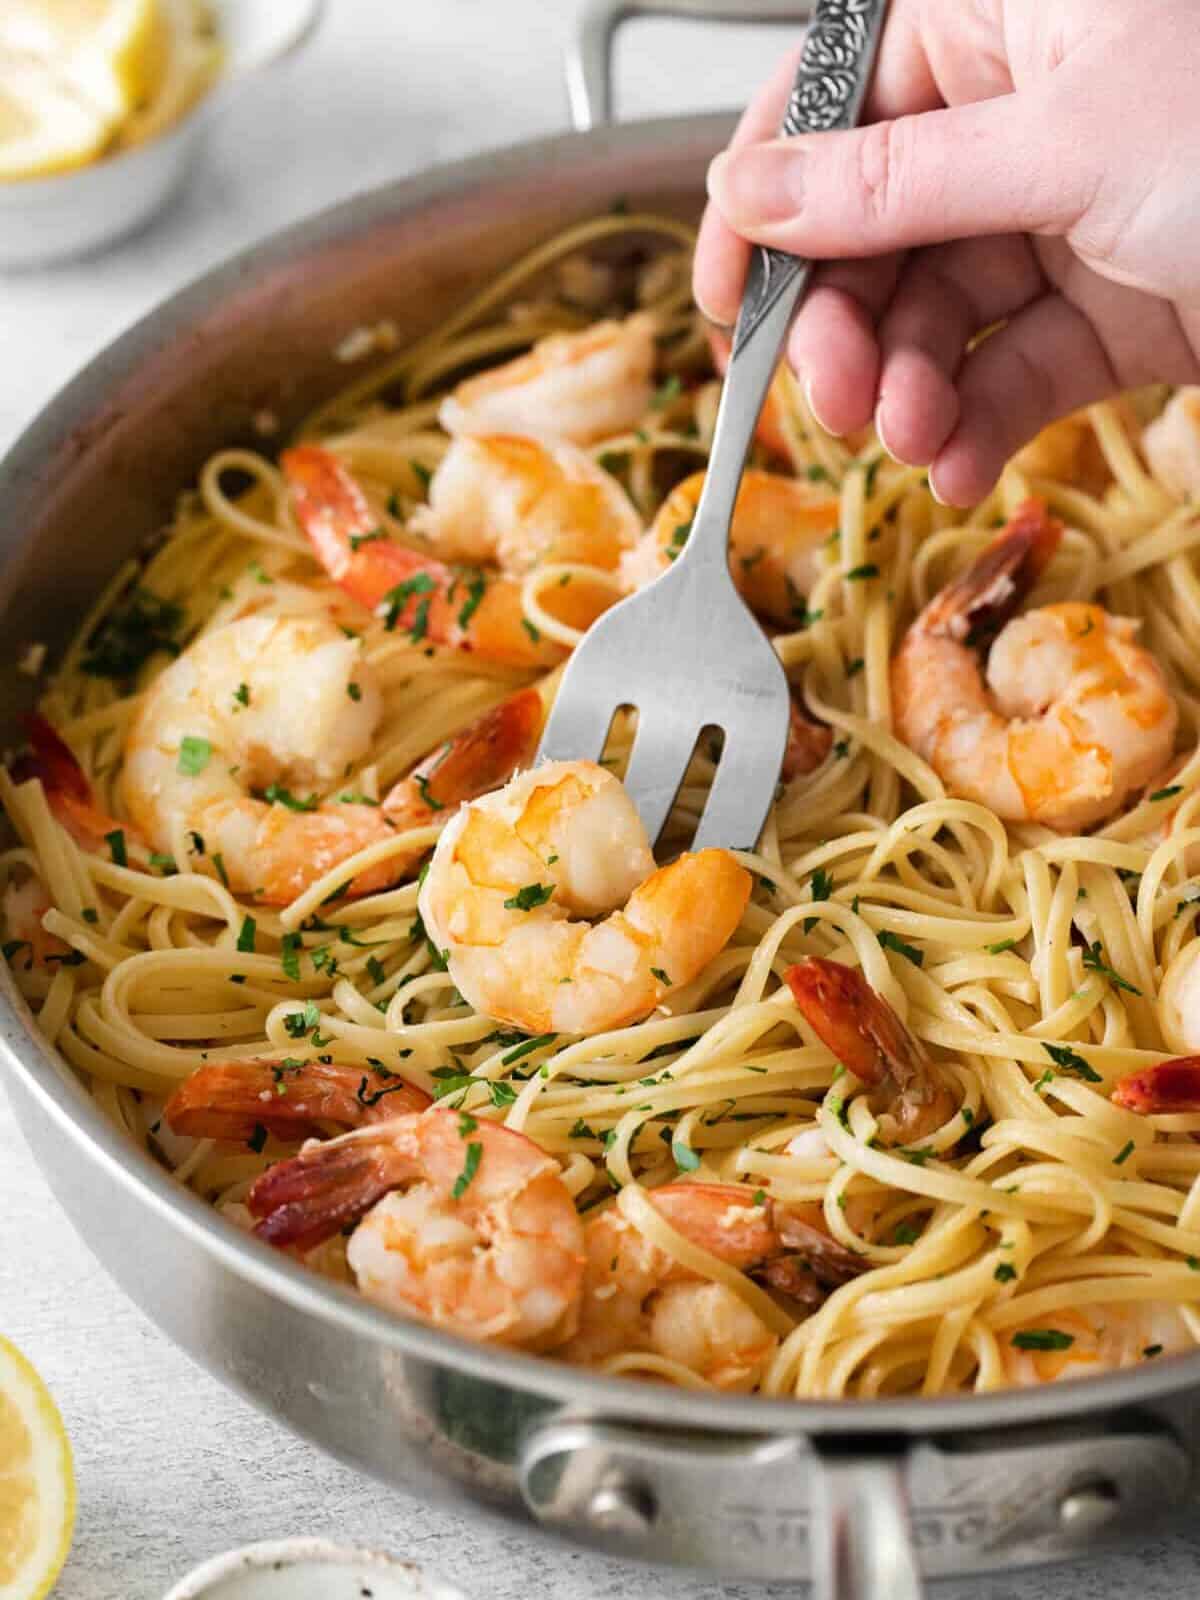 a hand using a slotted spoon to scoop shrimp scampi from a bed of pasta in a frying pan.